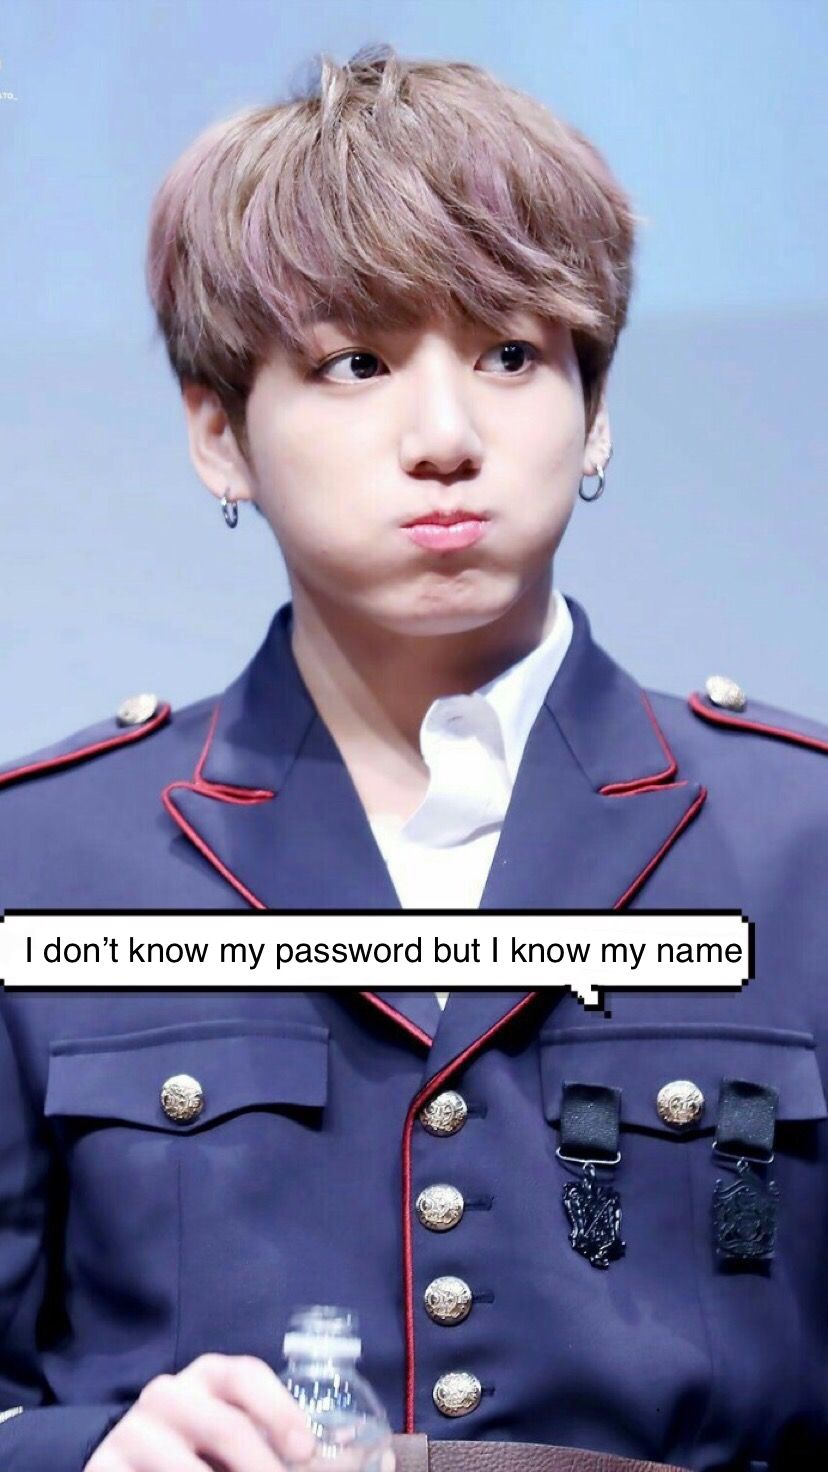 jungkook wallpaper,chin,forehead,official,military uniform,non commissioned officer